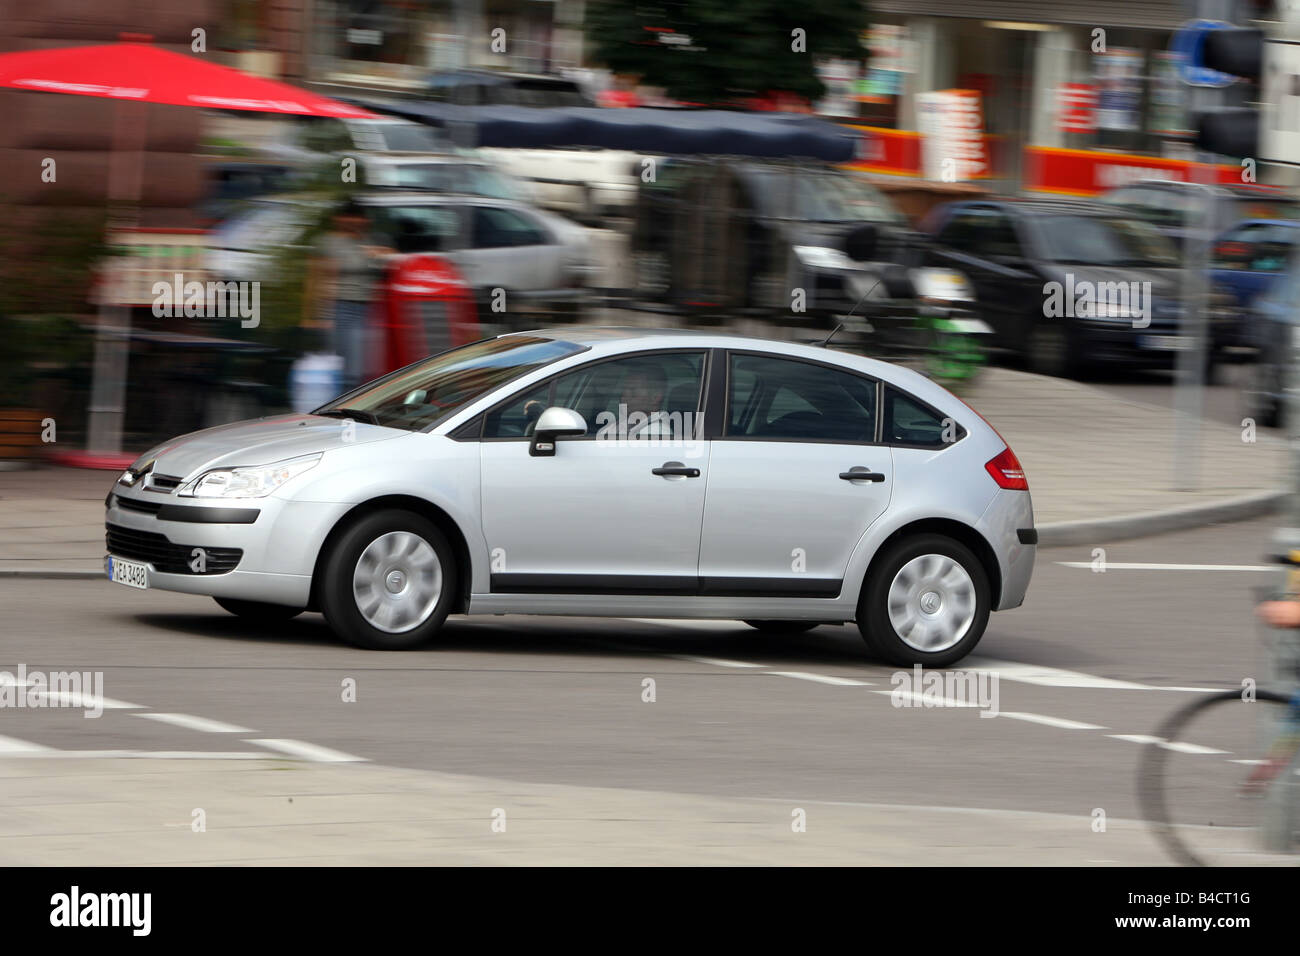 Citroen C4 1.4i 16V, model year 2004-, silver, driving, side view, City  Stock Photo - Alamy